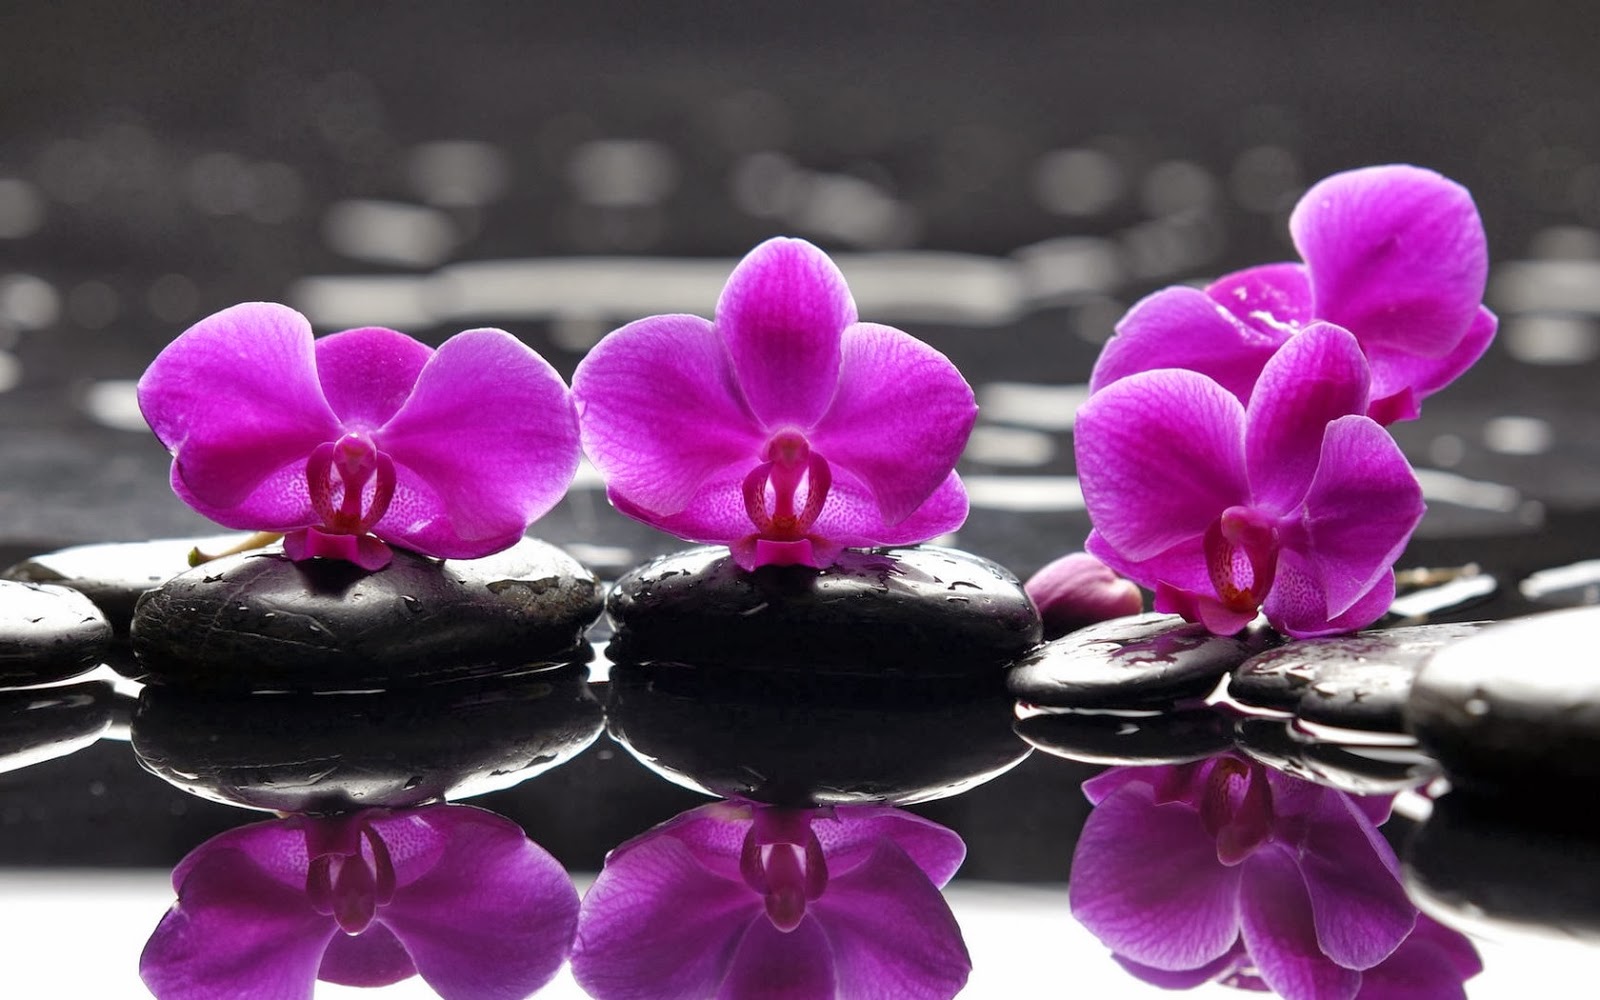 Get Flower Widescreen Wallpaper Orchids And Make This For